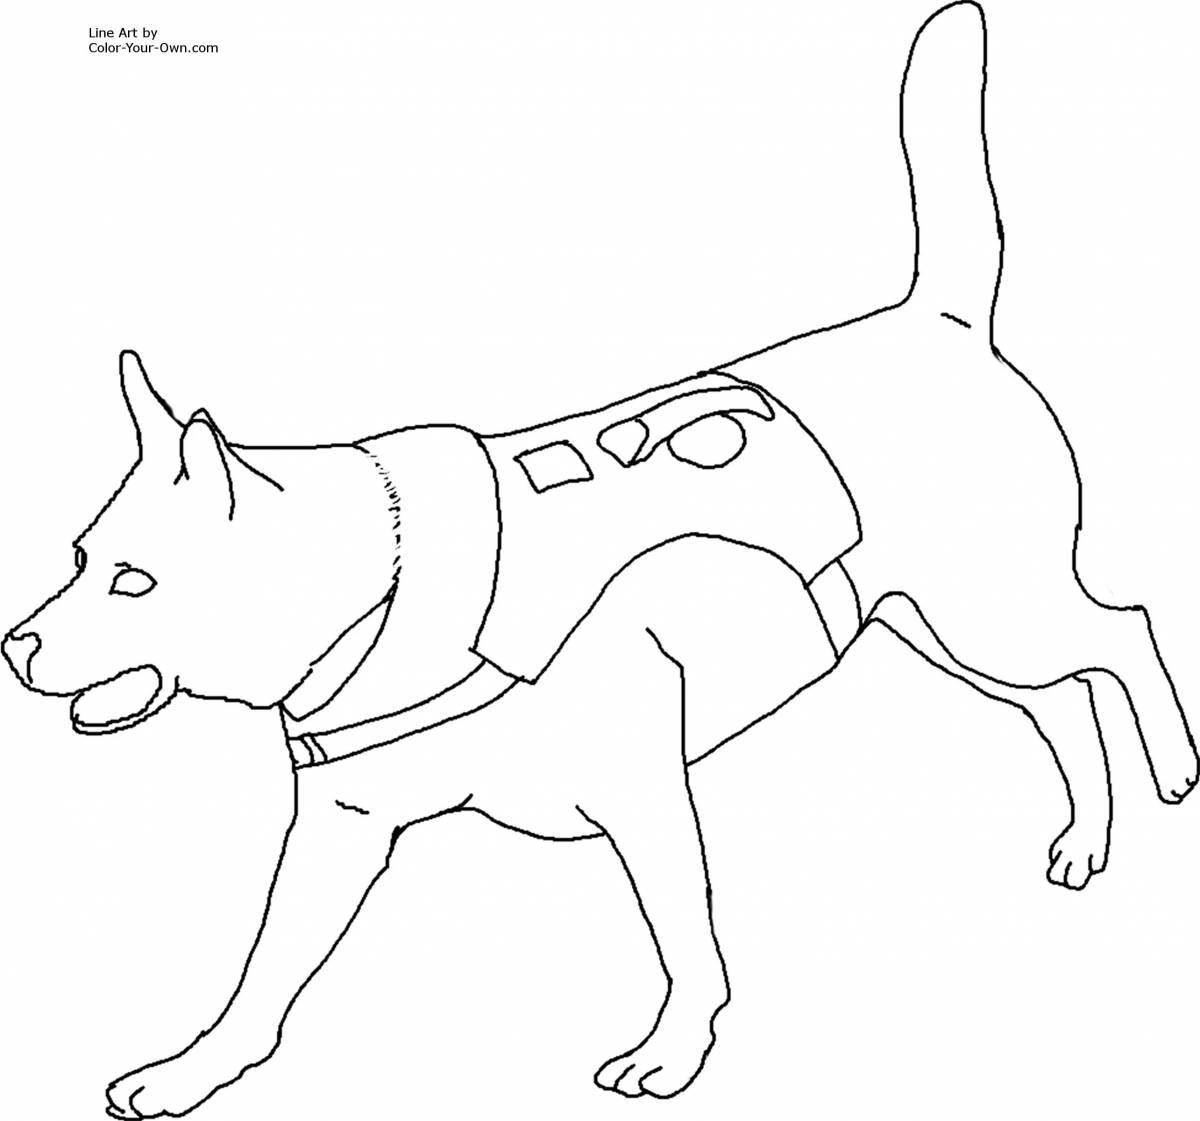 Coloring book glowing fiery dog